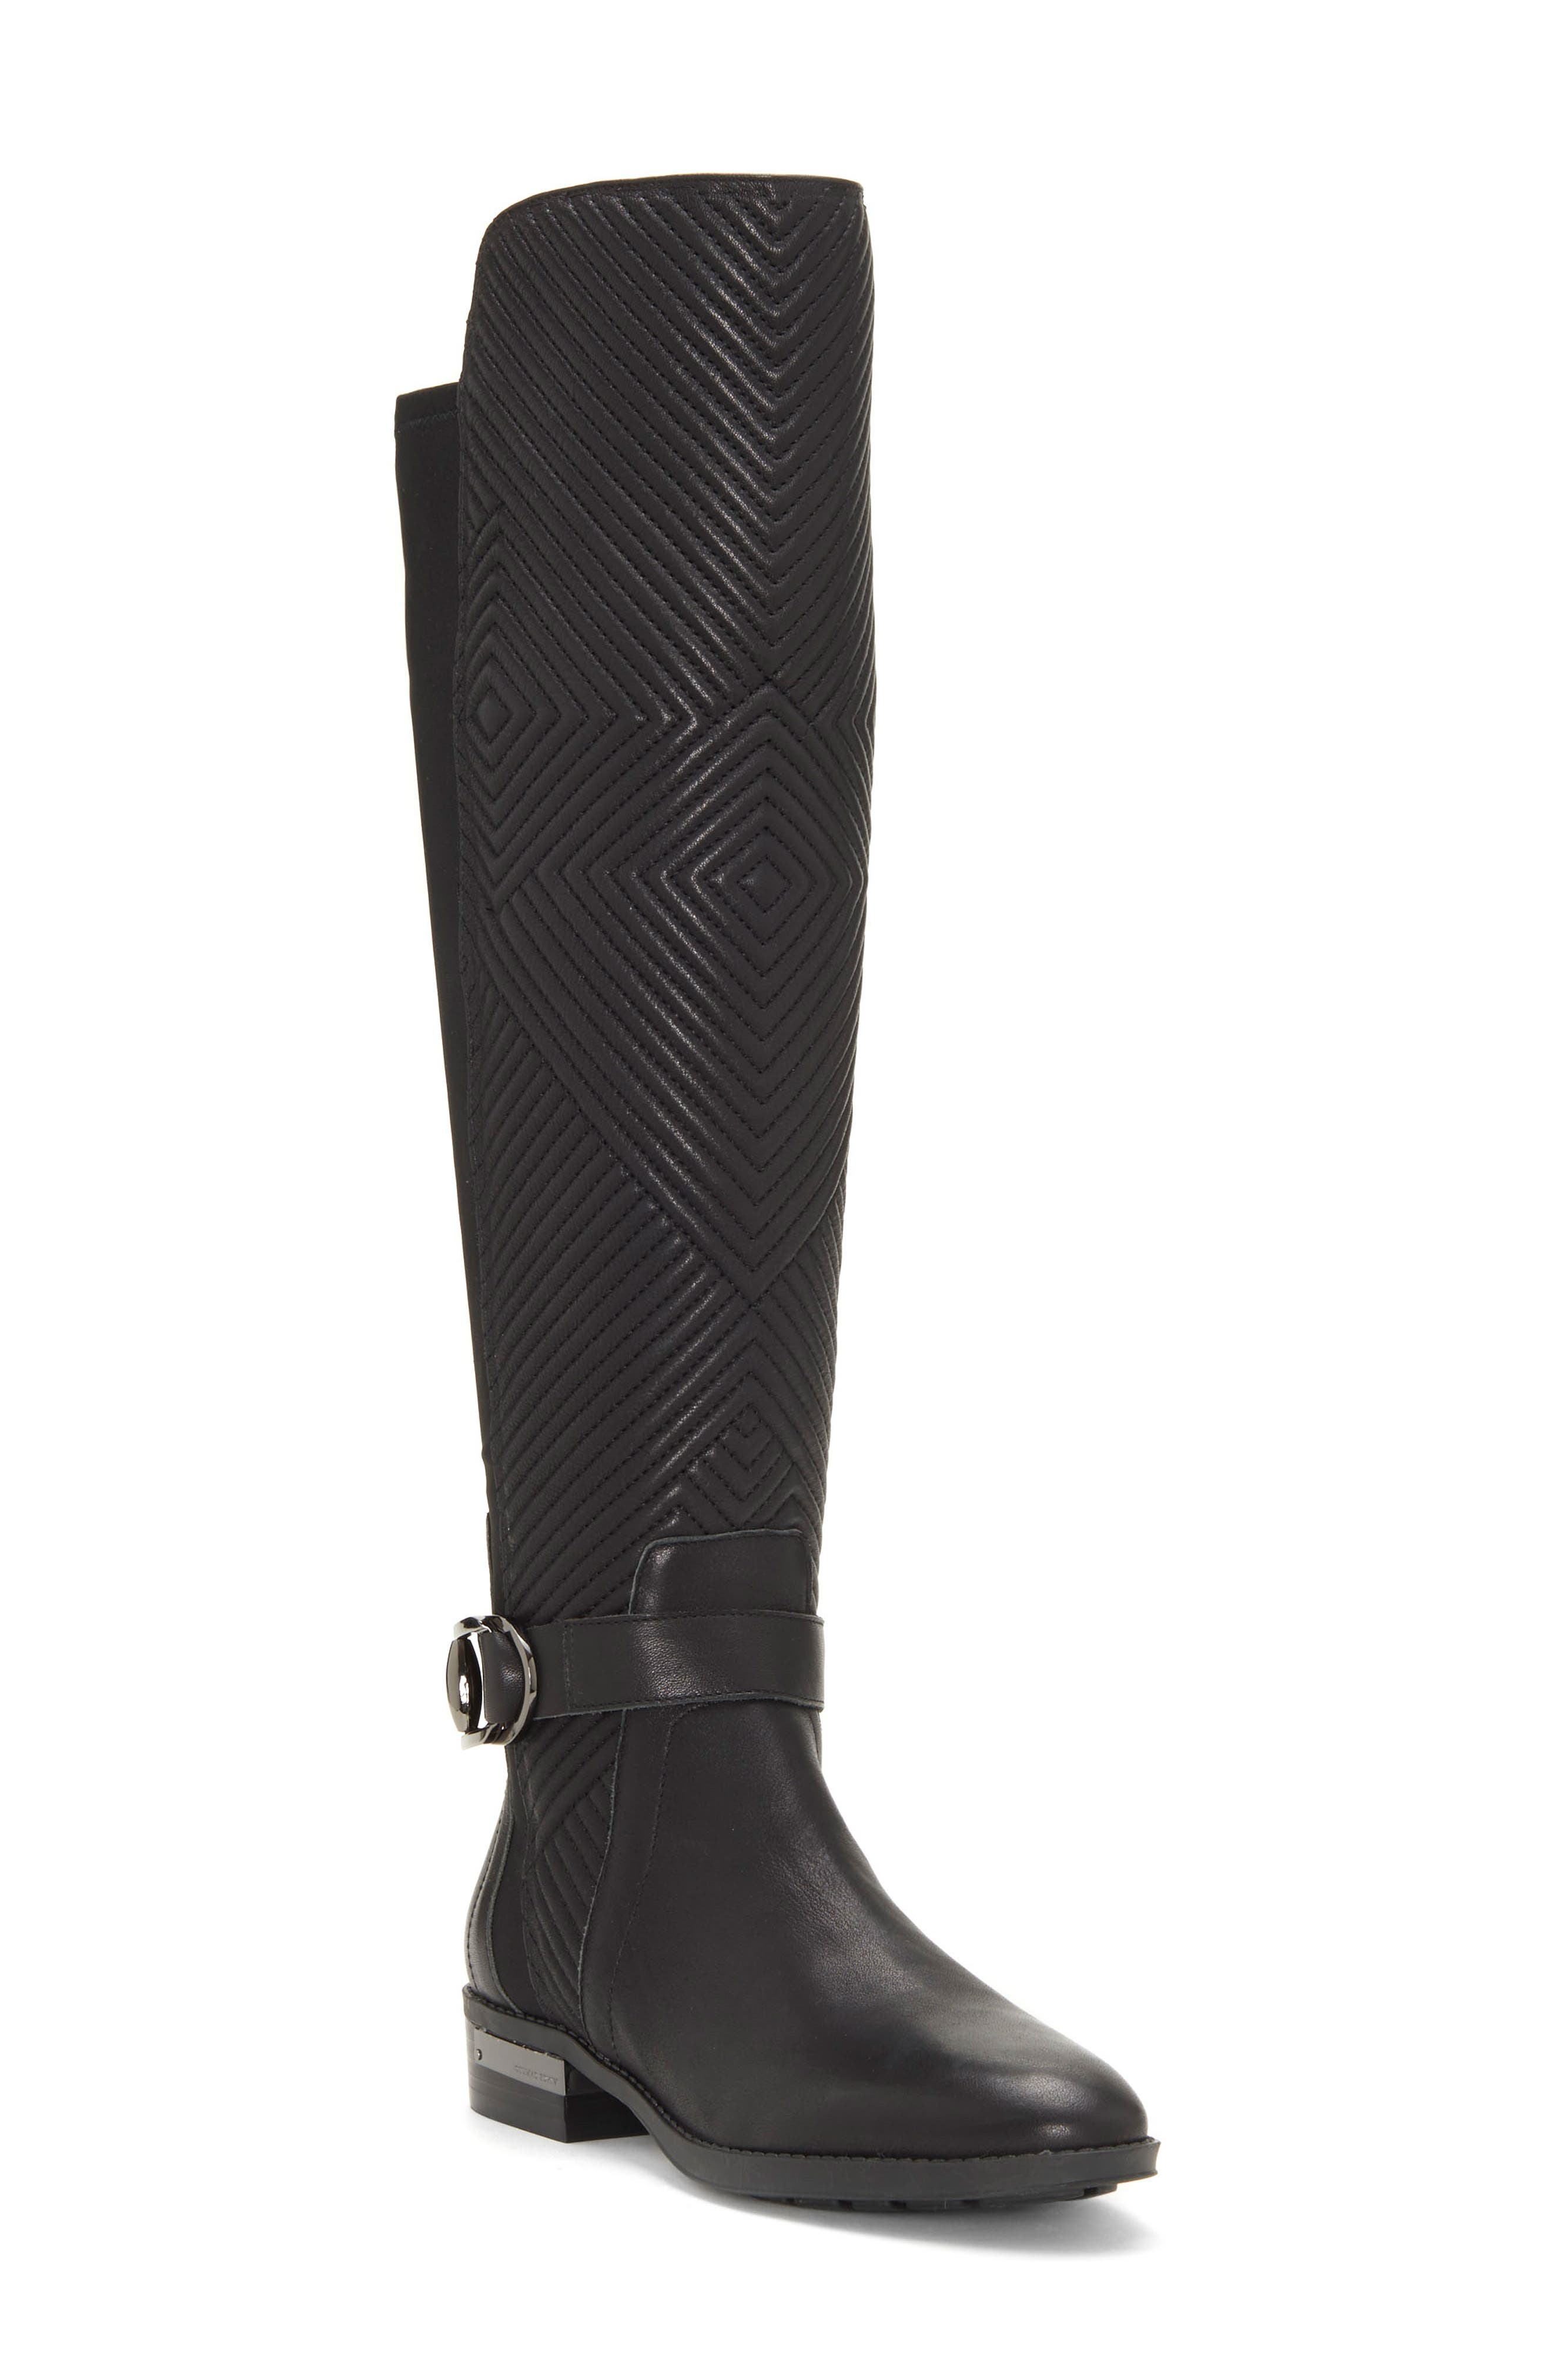 UPC 190662937735 product image for Women's Vince Camuto Pordalia Over-The-Knee Boot, Size 7.5 M - Black | upcitemdb.com